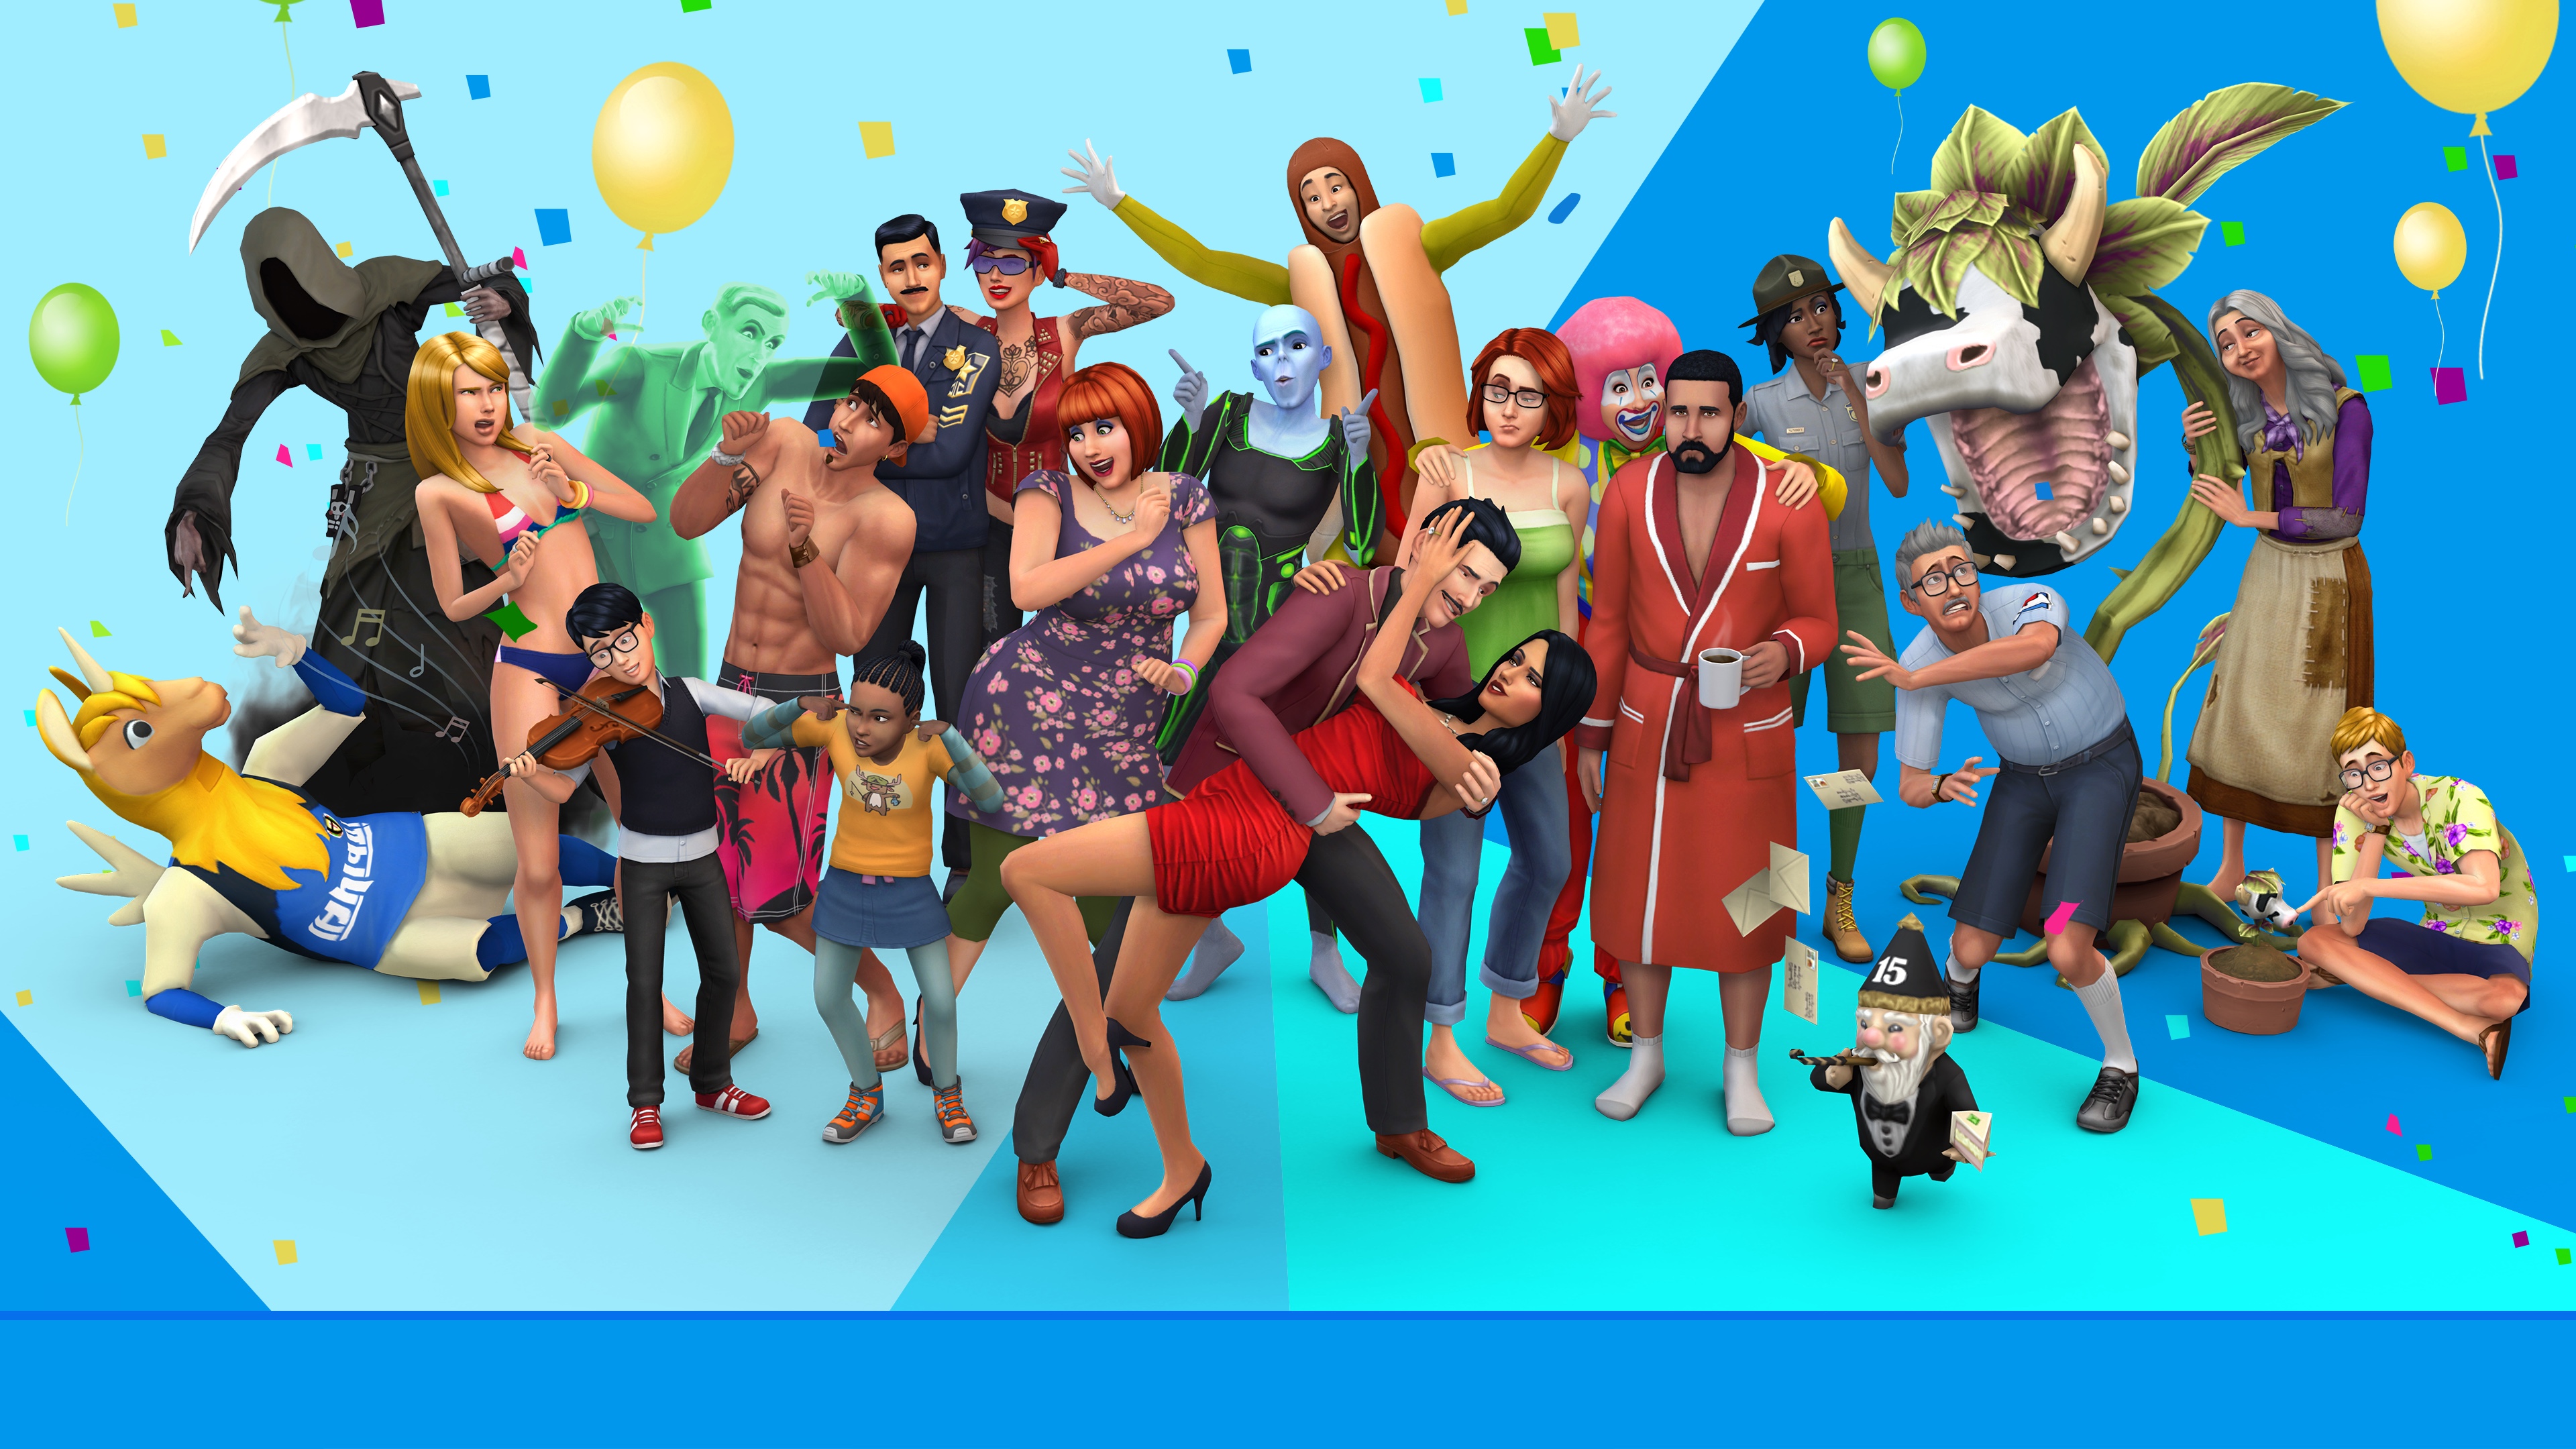 The Sims Anniversary Sale Save Up To 85 on Select Sims 4 Titles SimsVIP